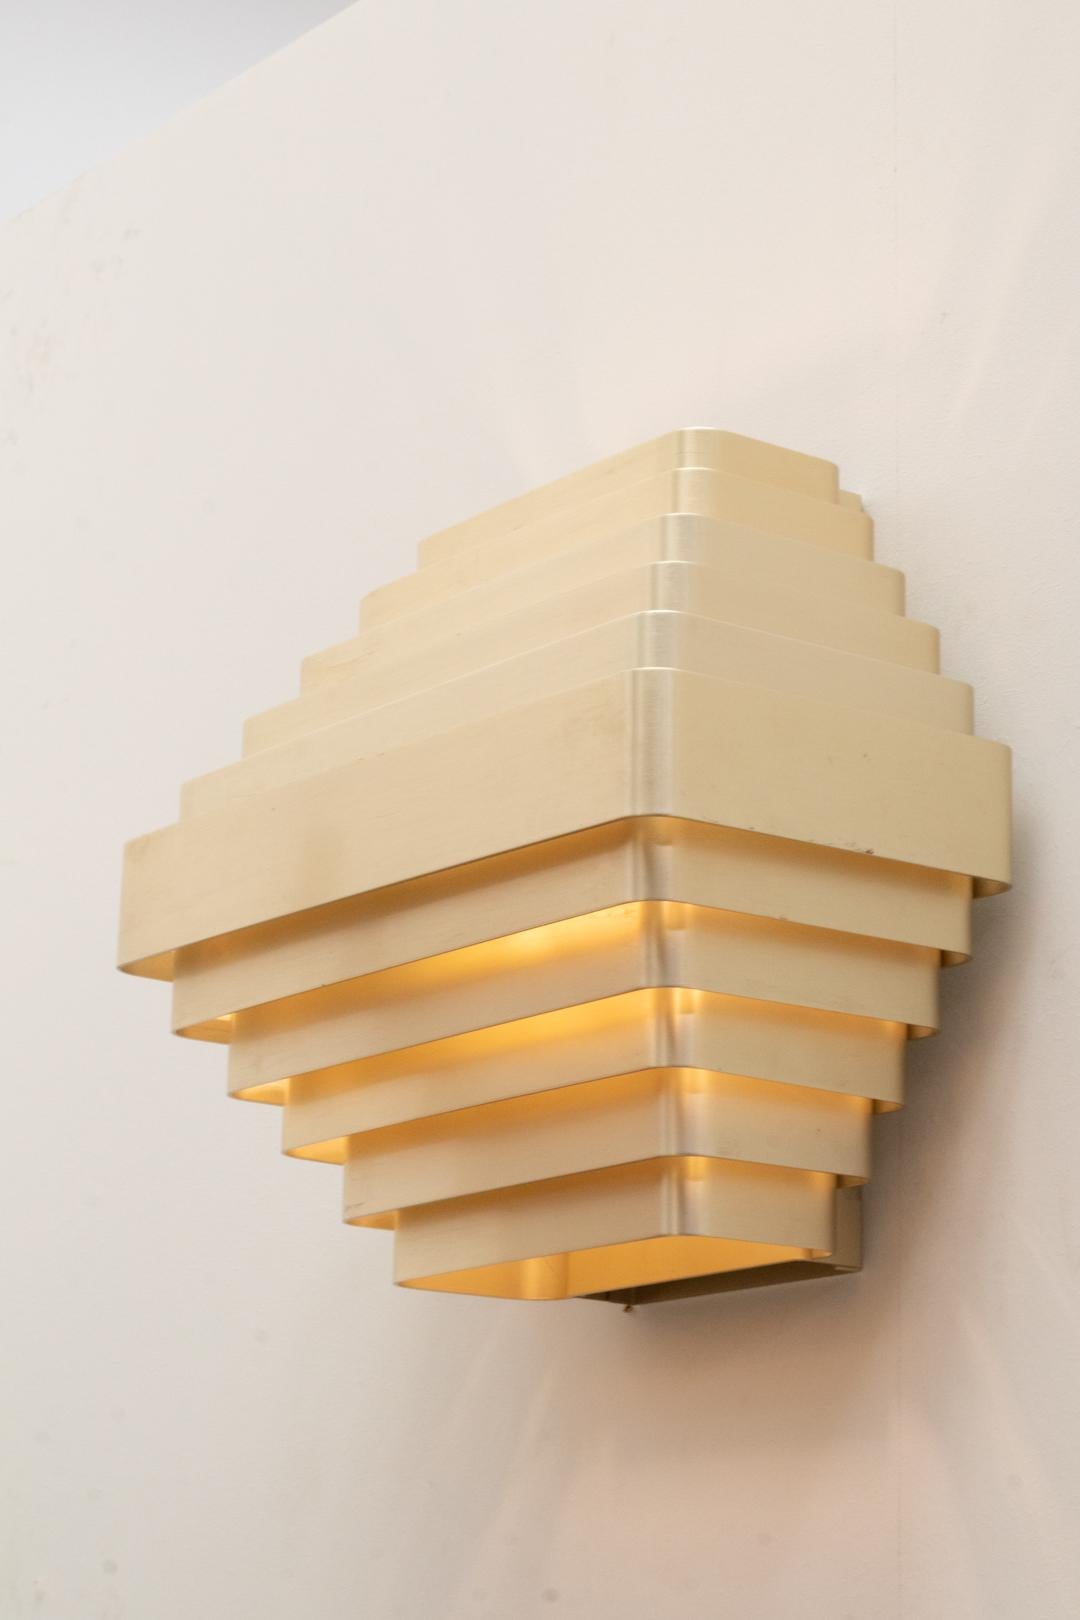 Large wall lamp by the belgian designer Jules Wabbes, dating back to circa 1970.
 It features 11 aluminum with a gold-finished strips  ... a great light effect and  a warm illumination.
This wall lamp is an original vintage piece, all in remarkably